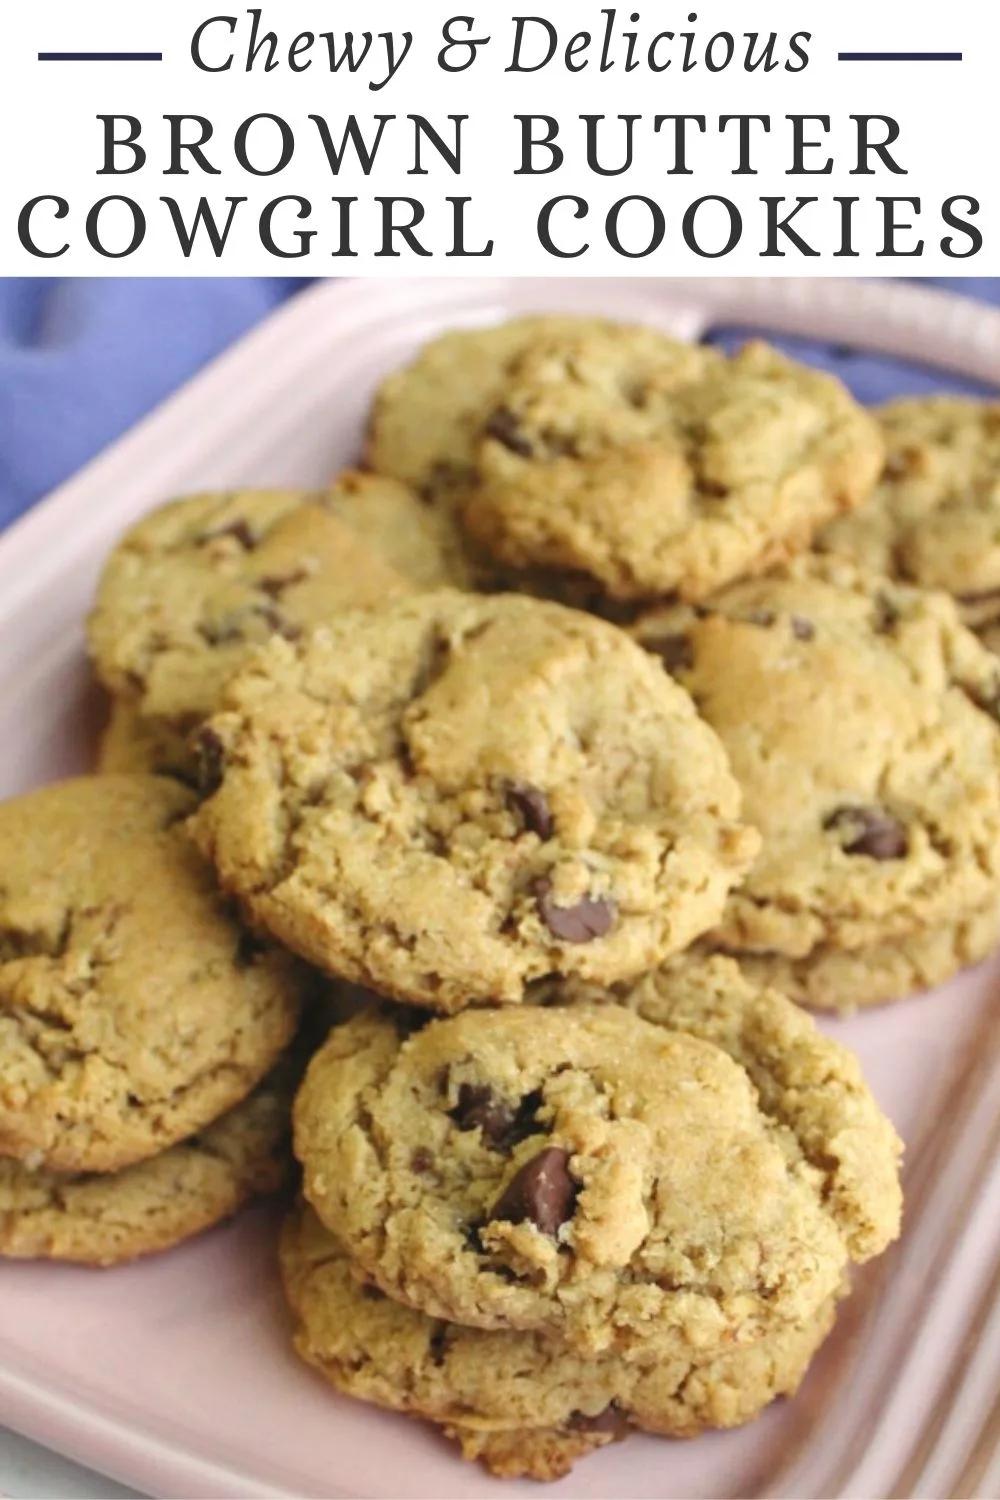 These cookies are a perfect way to quiet your sweet tooth. The brown butter adds depth of flavor and the final results are the perfect mix of chewy delicious oatmeal and chocolate cookies. A pinch of salt on top is optional, but adds one more layer of flavor. Make a batch to share or make some and freeze the extra for when you need to treat yourself!